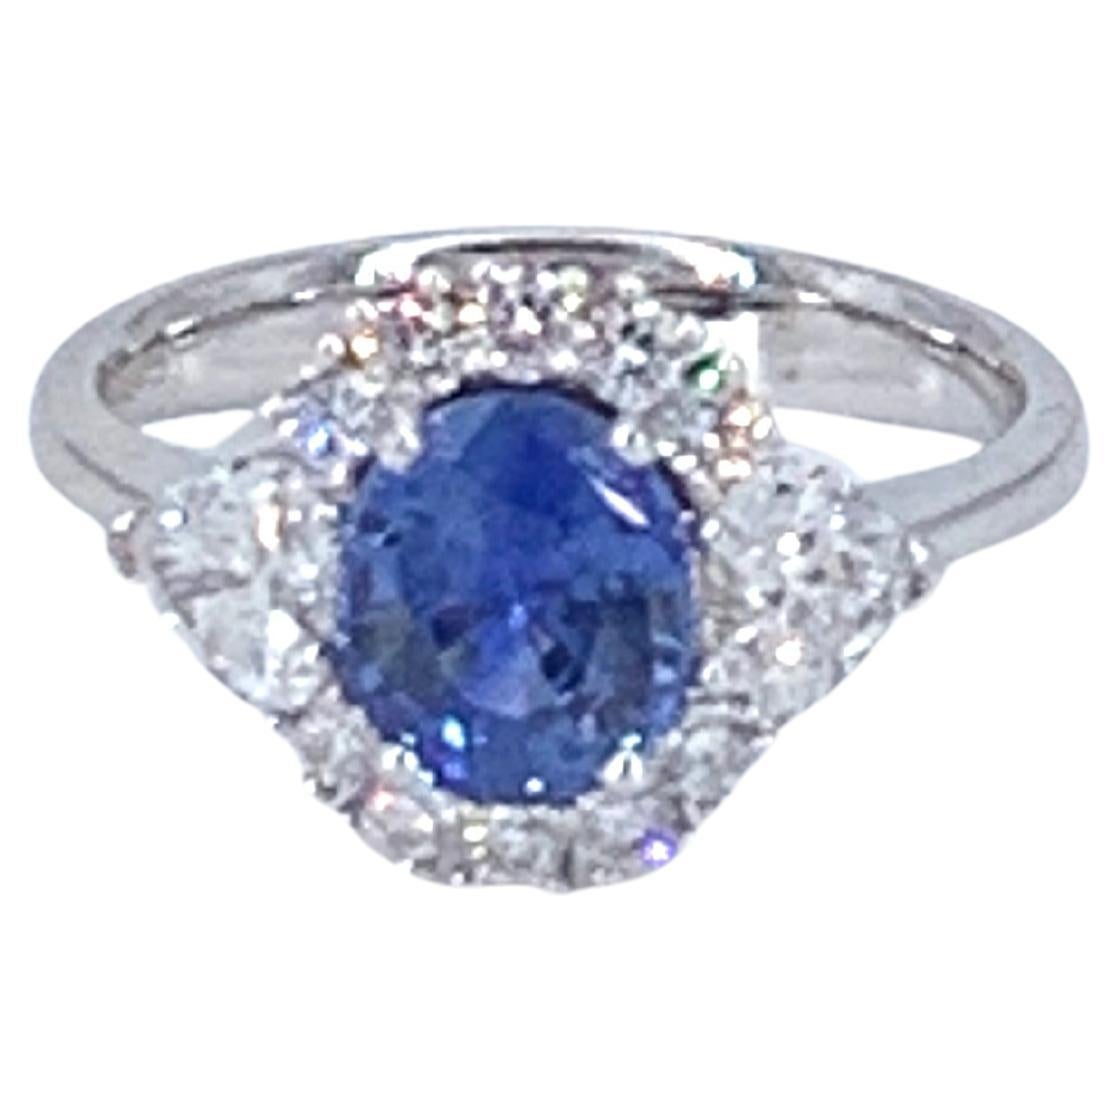 This beautiful 1.65 Carat Sapphire sits within 1.23 Carats of natural Diamond and is all set in 18kt white Gold. 

Unlike the average Sapphire ring with Diamond around, this design adds flare and extra beauty by having 2 pear shaped Diamonds on